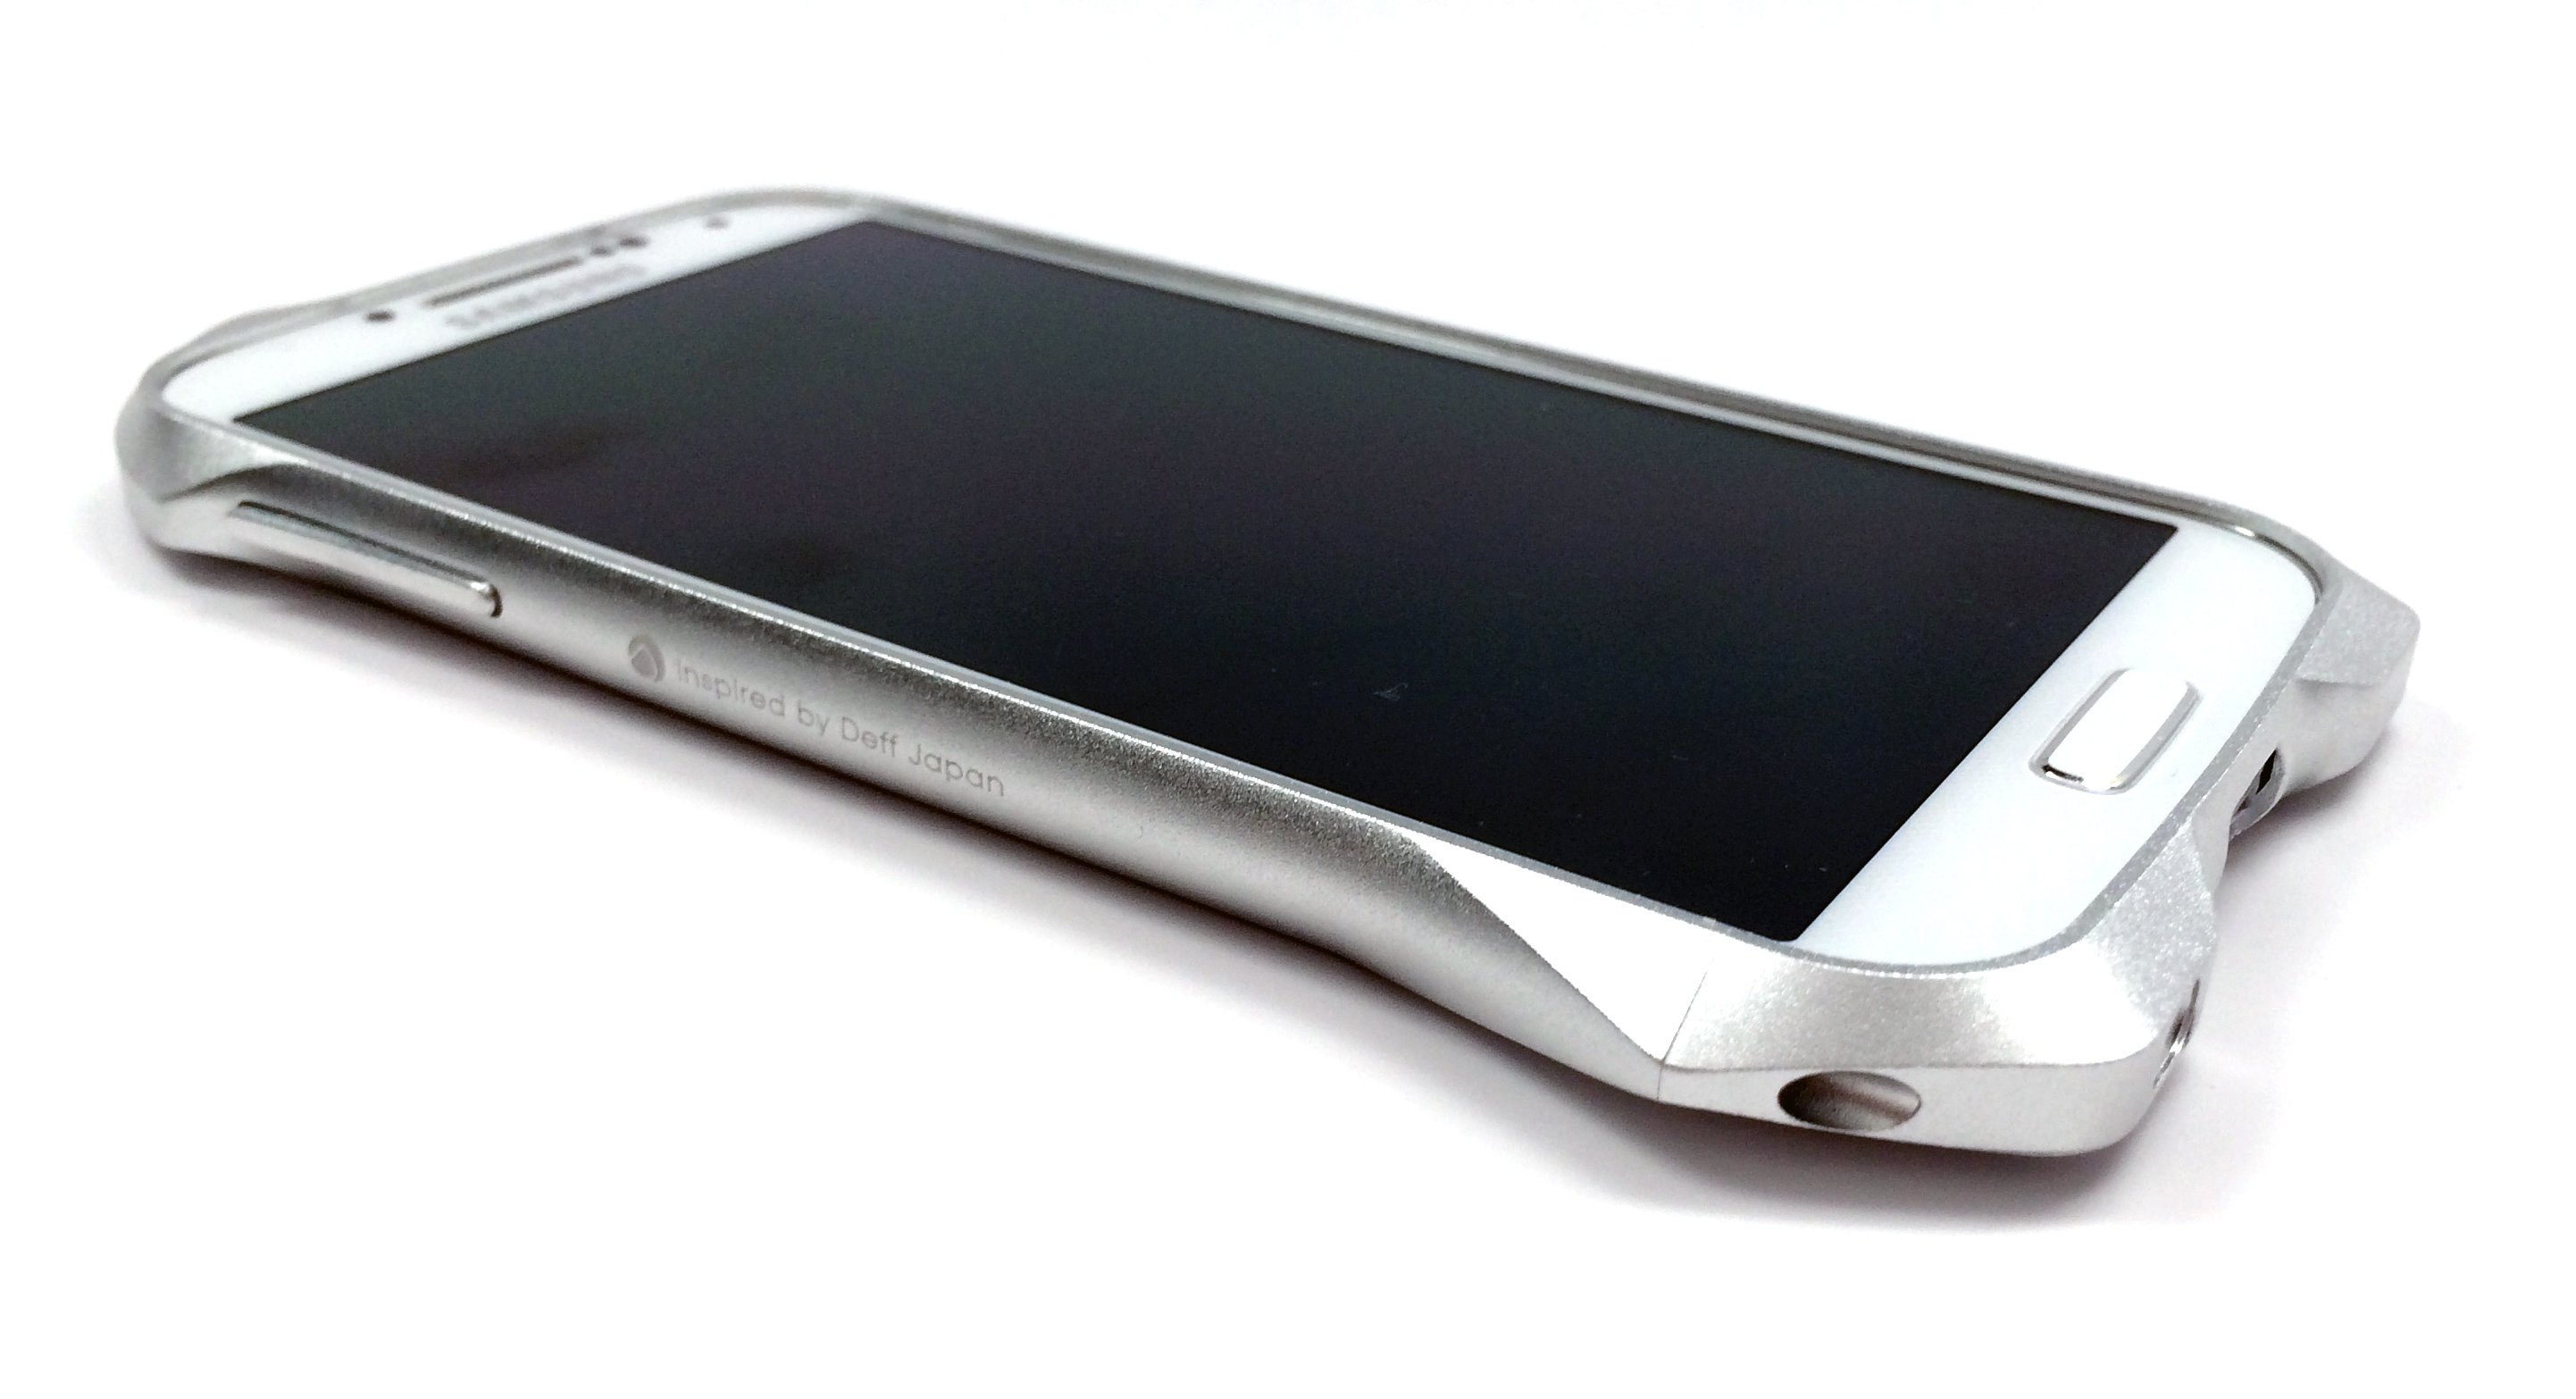 Look for a premium design on the Samsung Galaxy S5 according to the latest rumors.